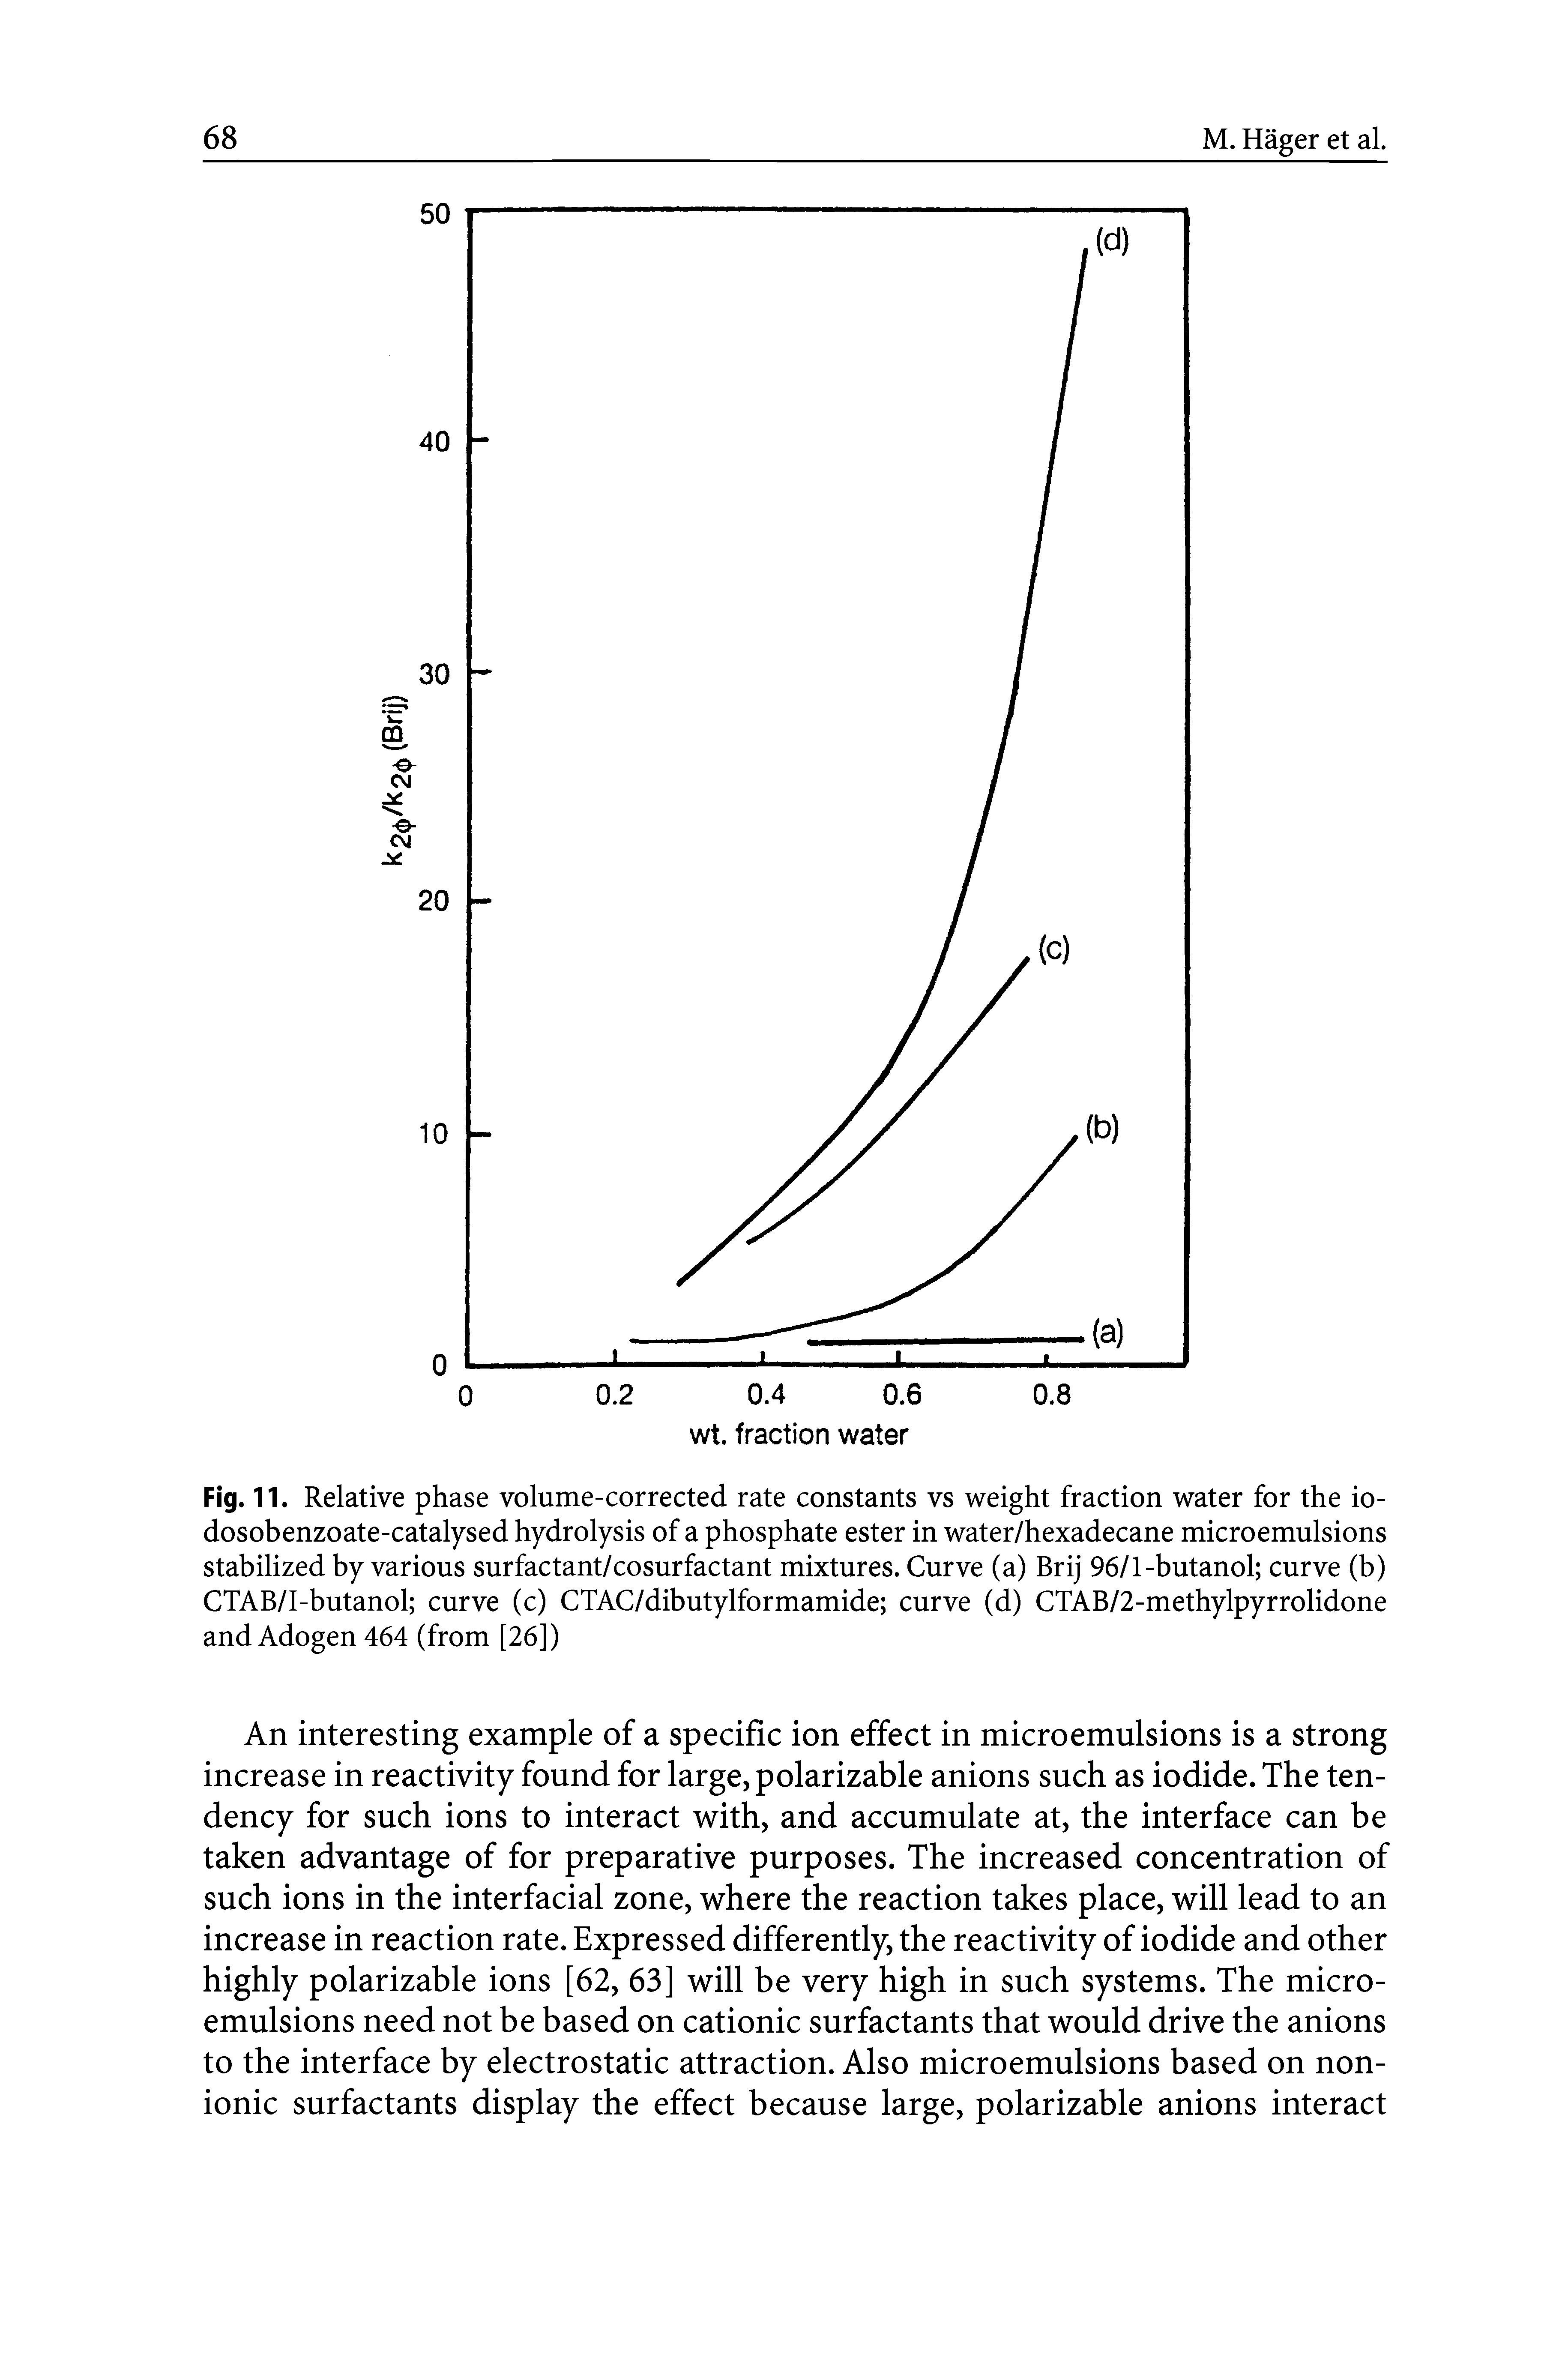 Fig. 11. Relative phase volume-corrected rate constants vs weight fraction water for the io-dosobenzoate-catalysed hydrolysis of a phosphate ester in water/hexadecane microemulsions stabilized by various surfactant/cosurfactant mixtures. Curve (a) Brij 96/1-butanol curve (b) CTAB/I-butanol curve (c) CTAC/dibutylformamide curve (d) CTAB/2-methylpyrrolidone and Adogen 464 (from [26])...